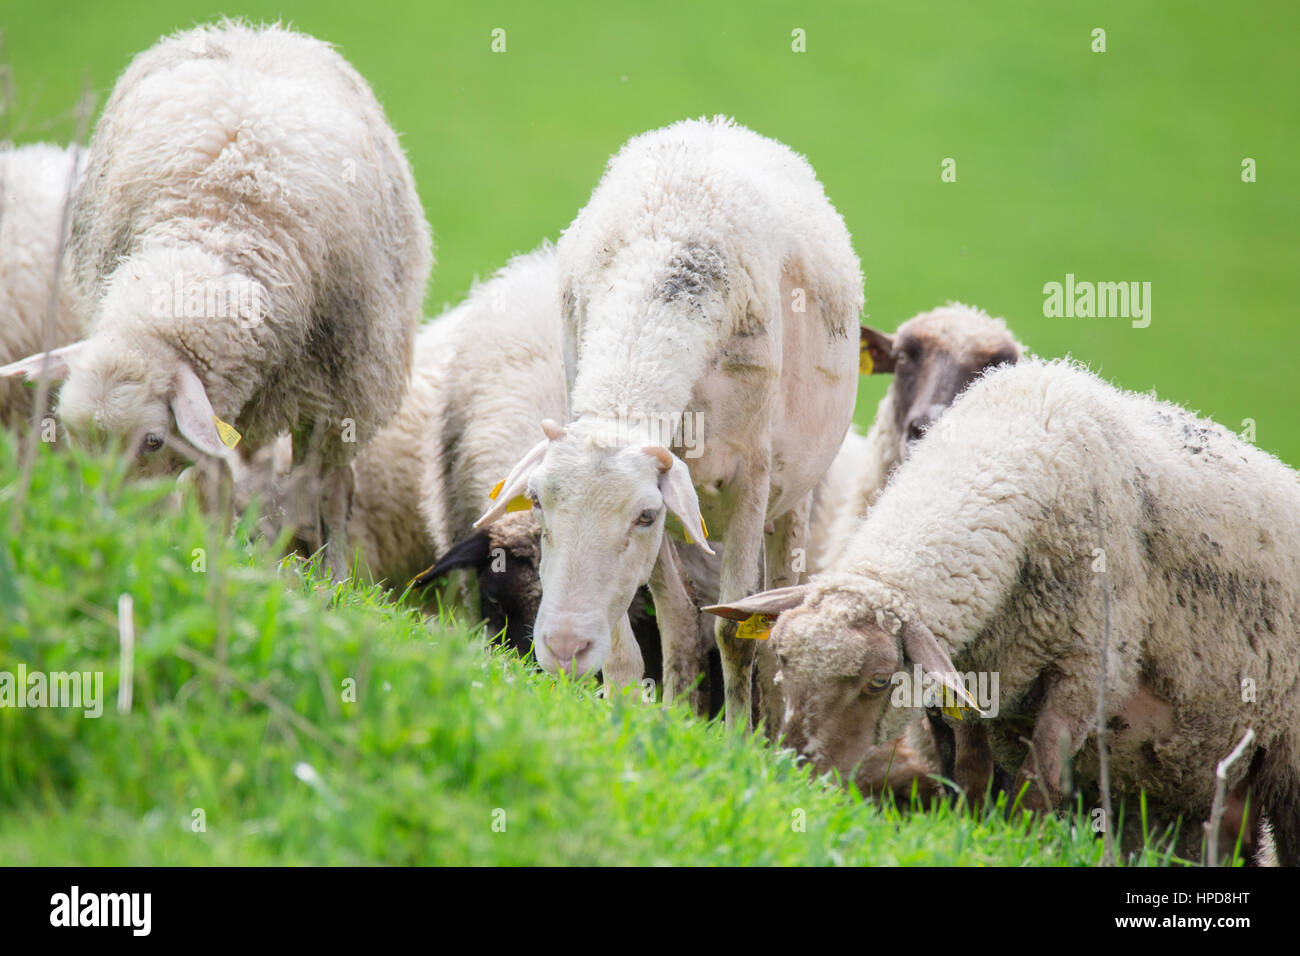 Sheep herd on green meadow eating grass Stock Photo